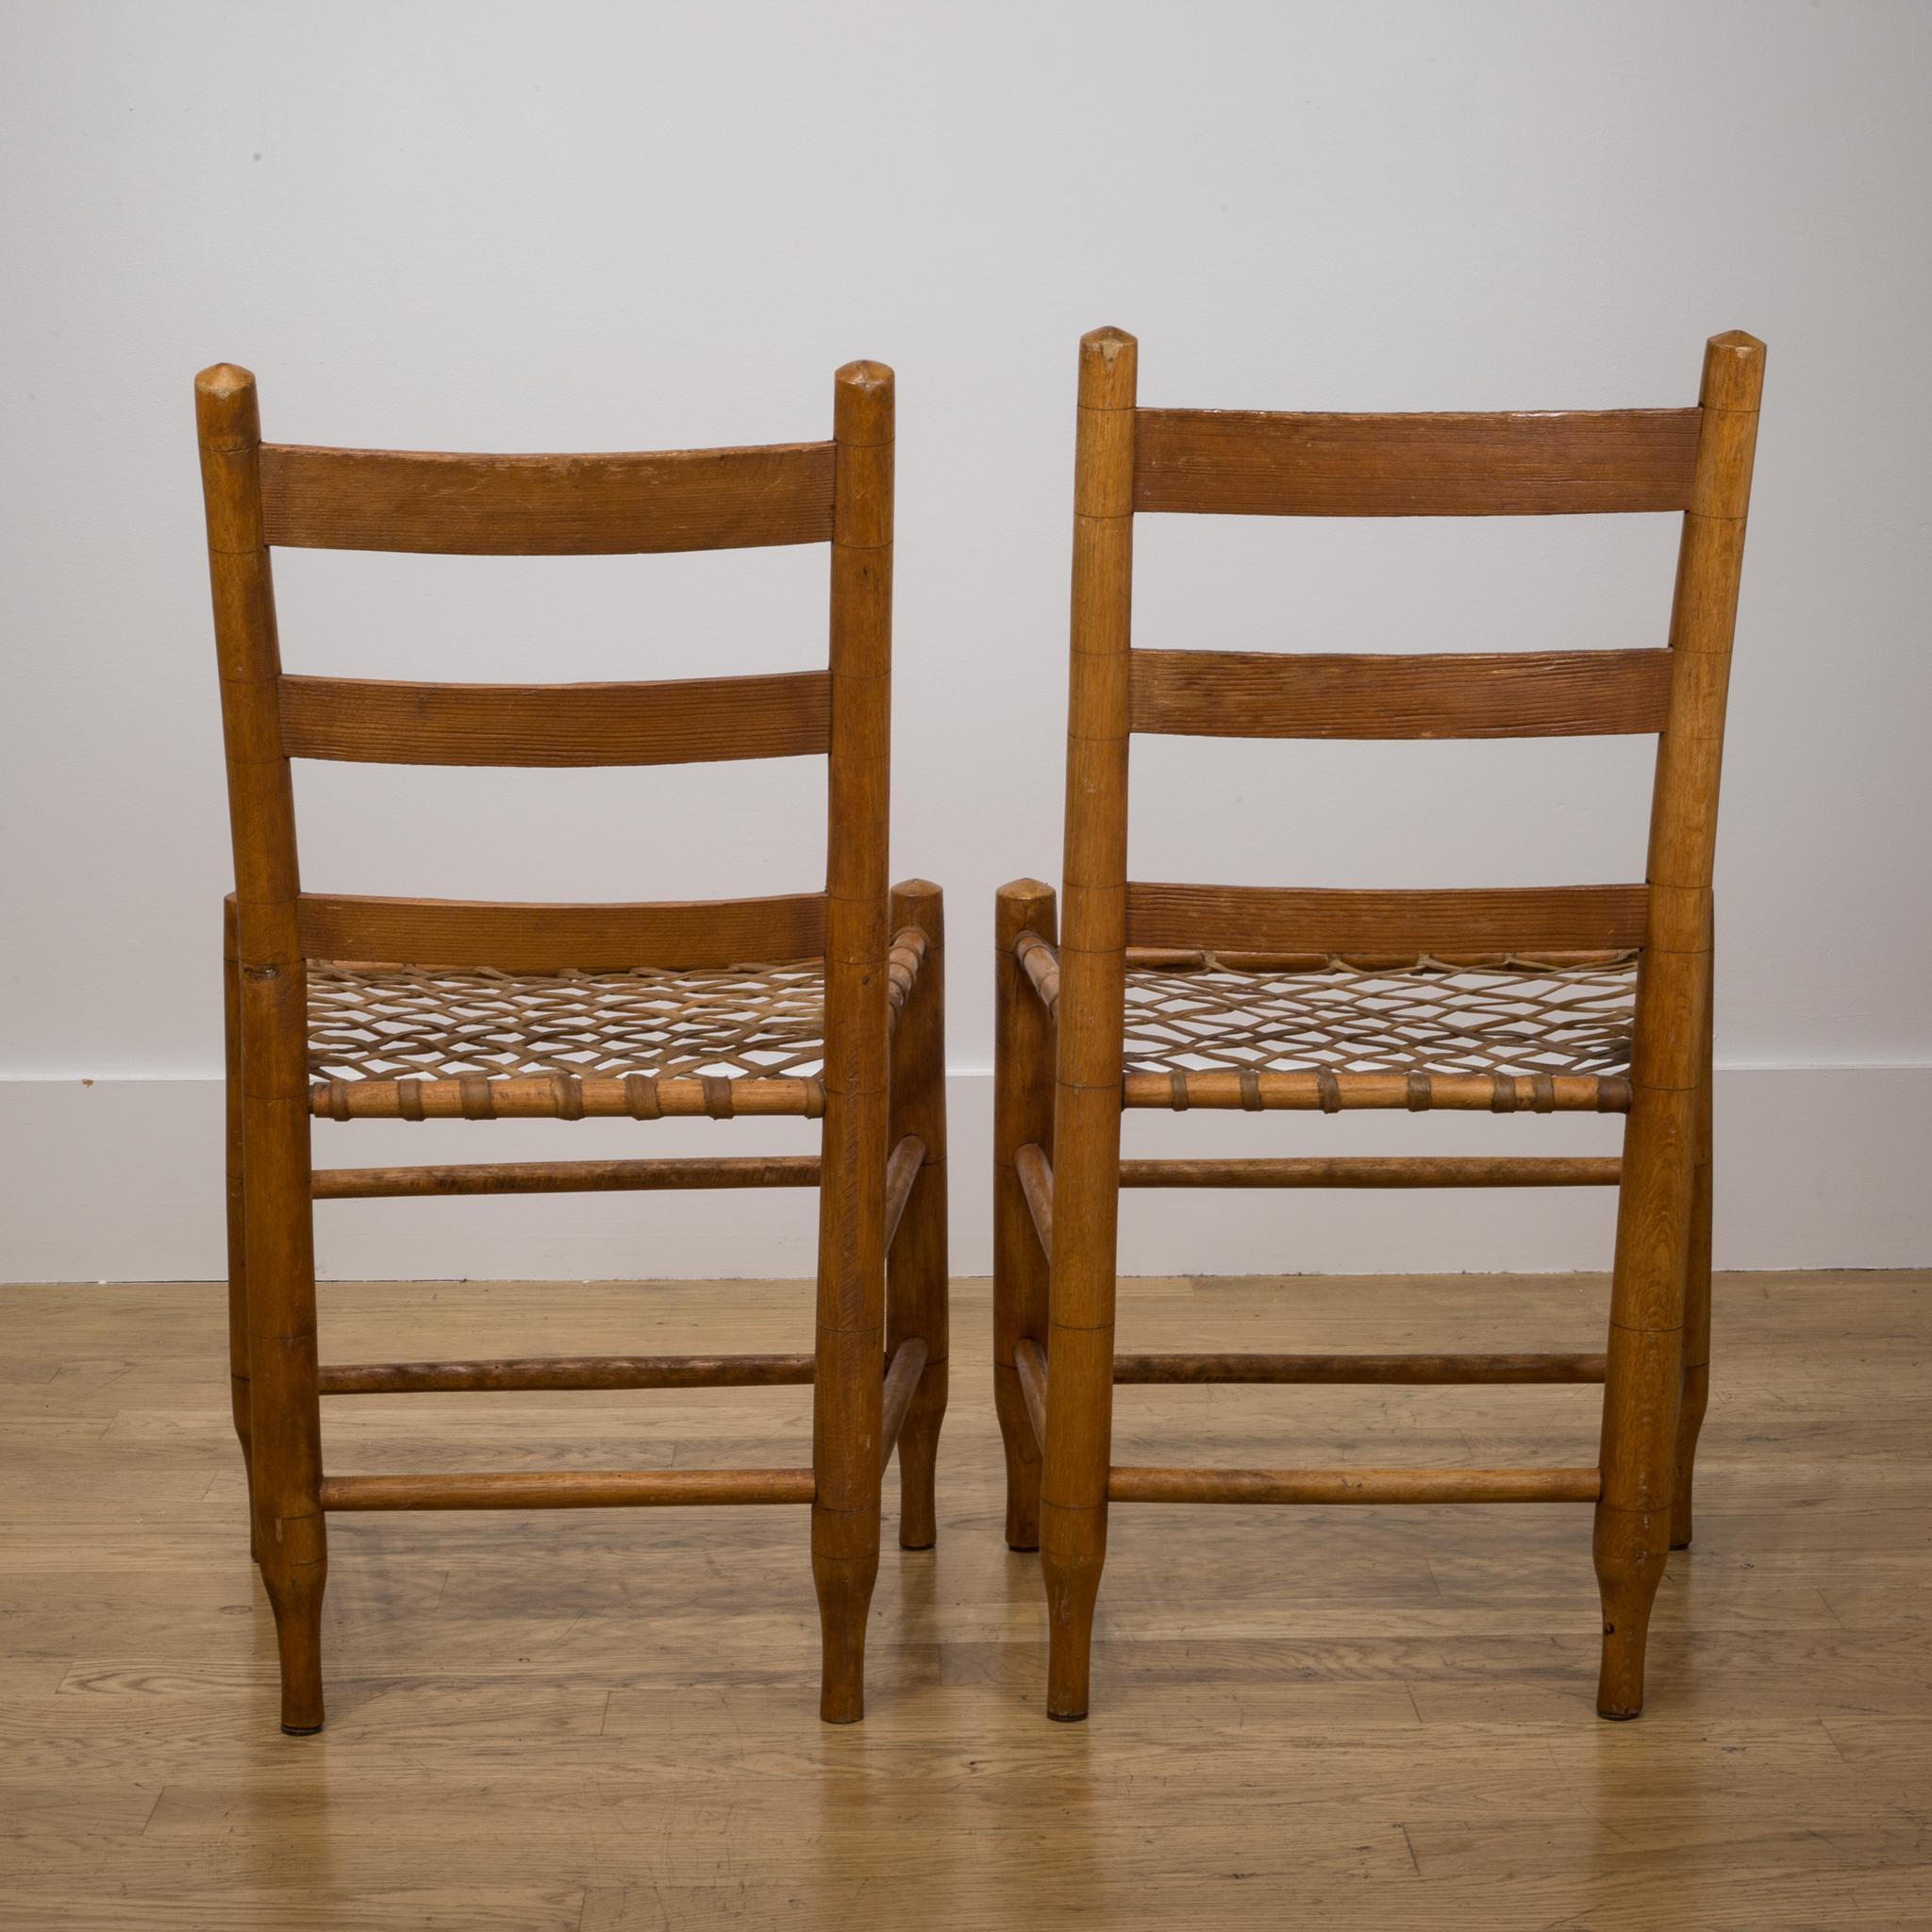 19th Century Rawhide Chairs from Historic Oregon Commune, circa 1856 5